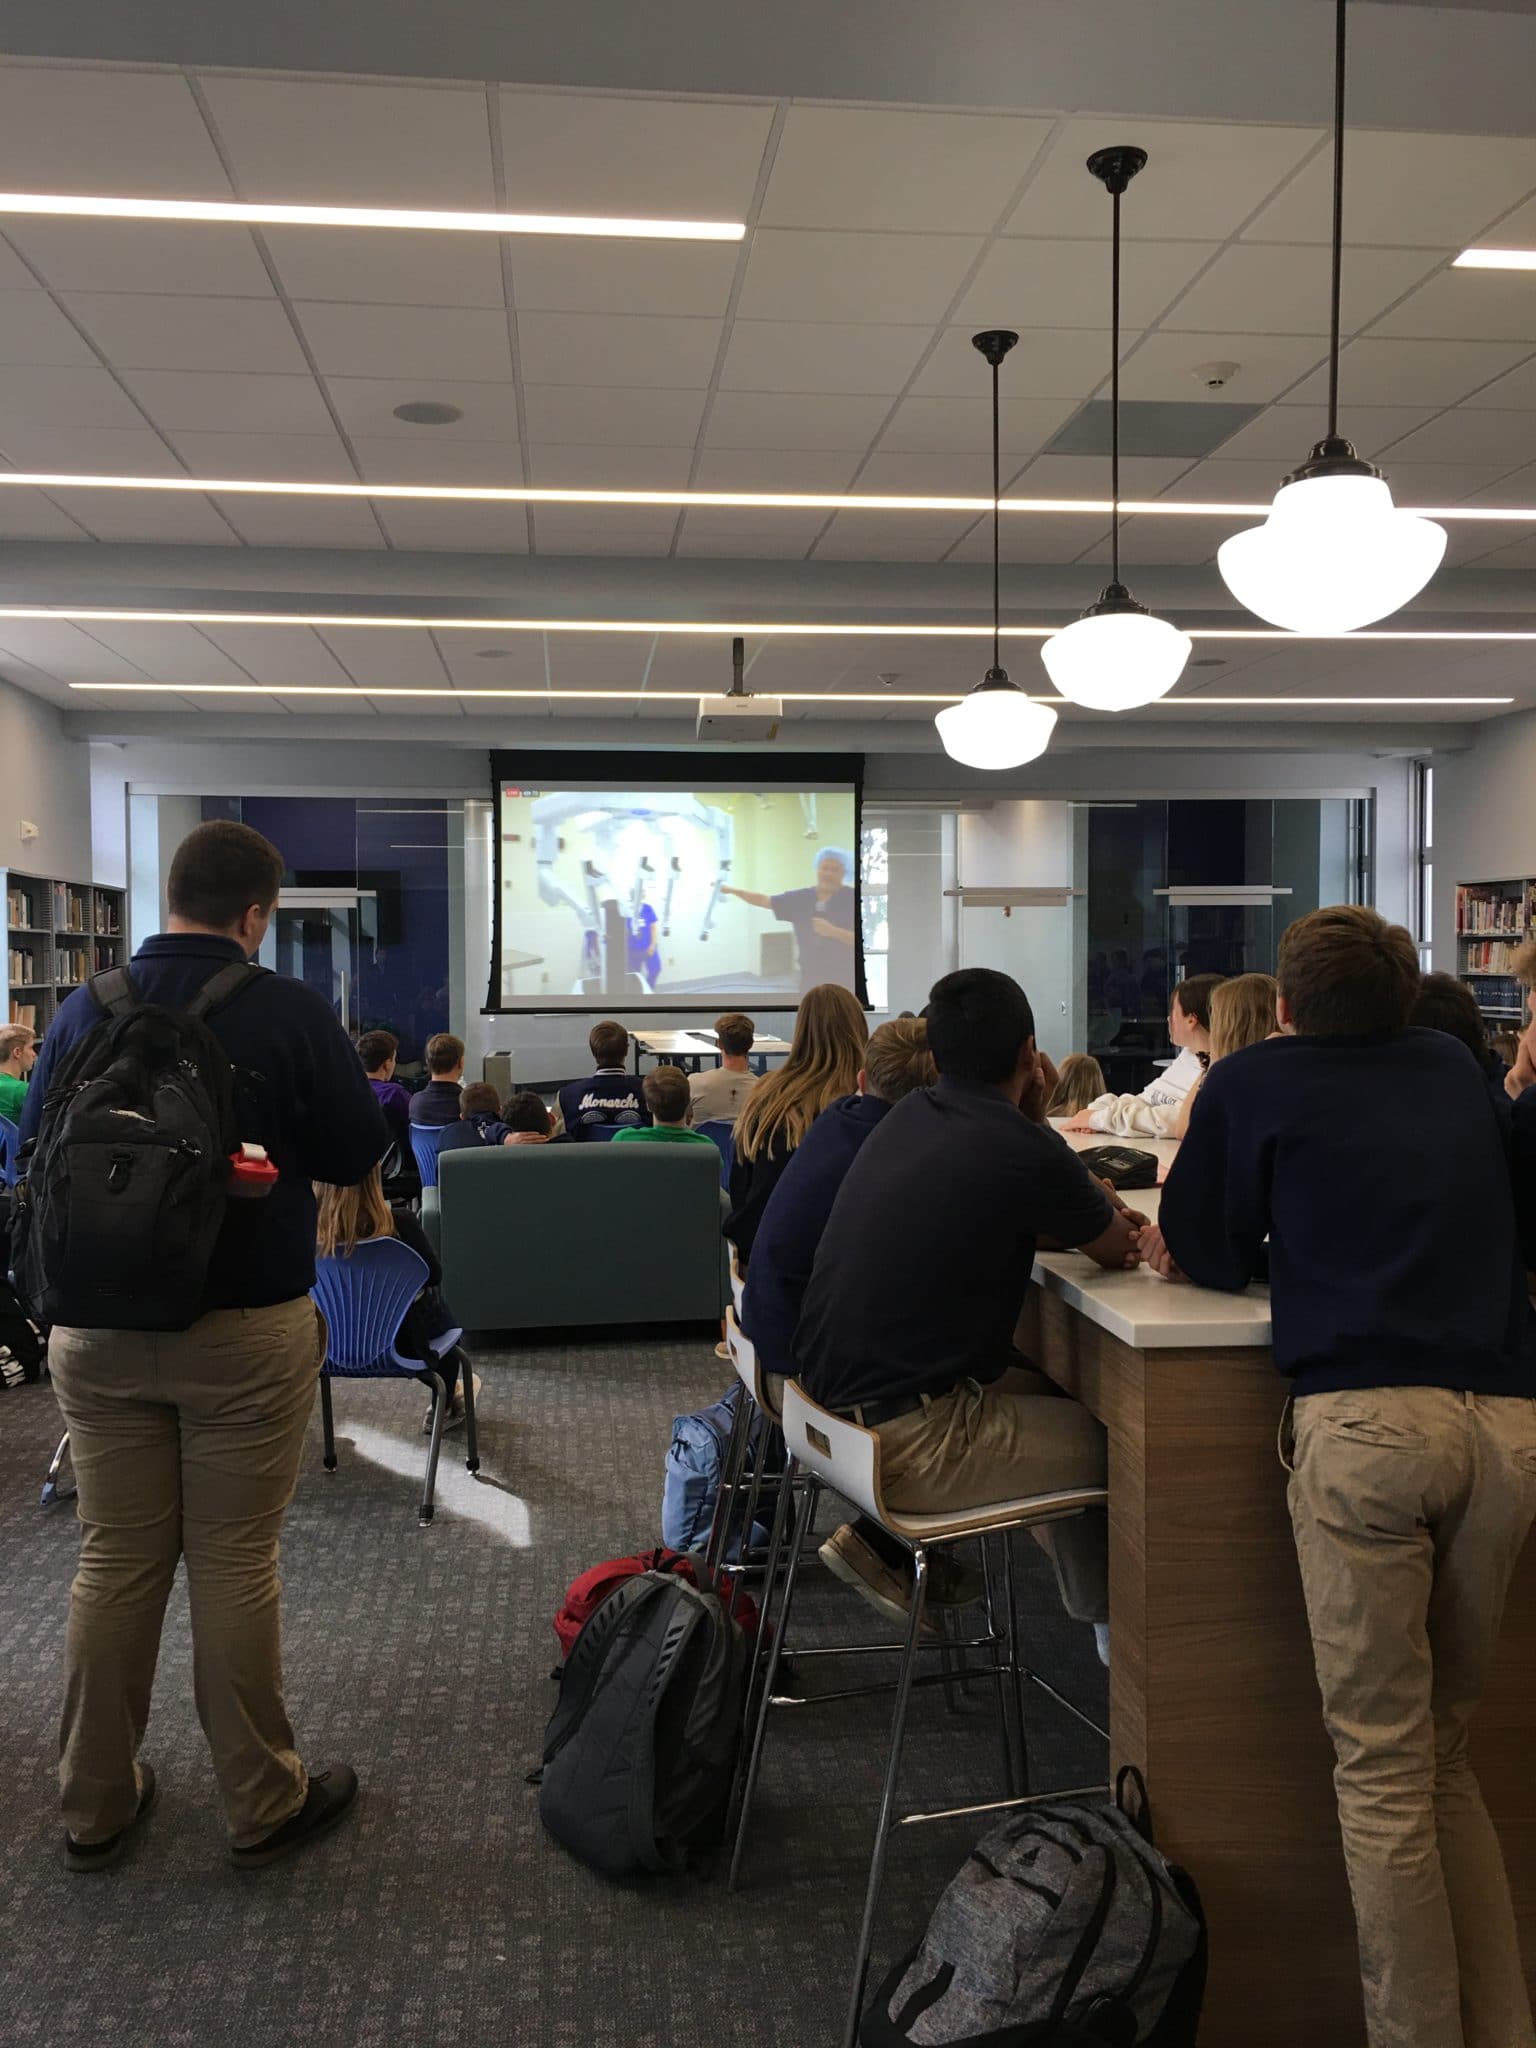 Courtesy Photo | Students at Thomas More Prep-Marian Junior/Senior High in Hays watch the live demonstration in their new learning commons.